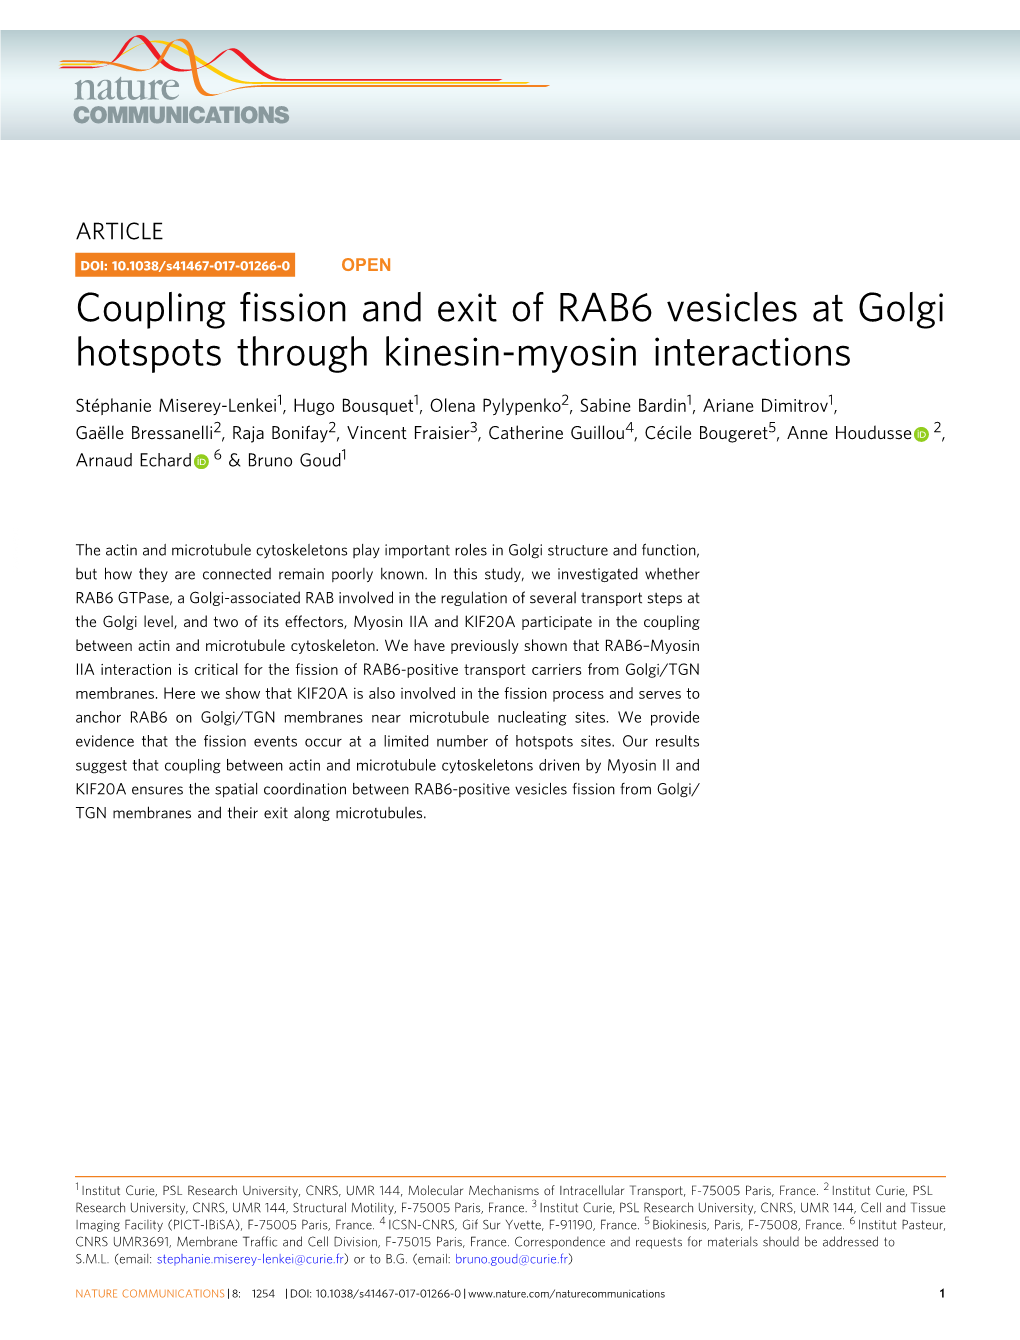 Coupling Fission and Exit of RAB6 Vesicles at Golgi Hotspots Through